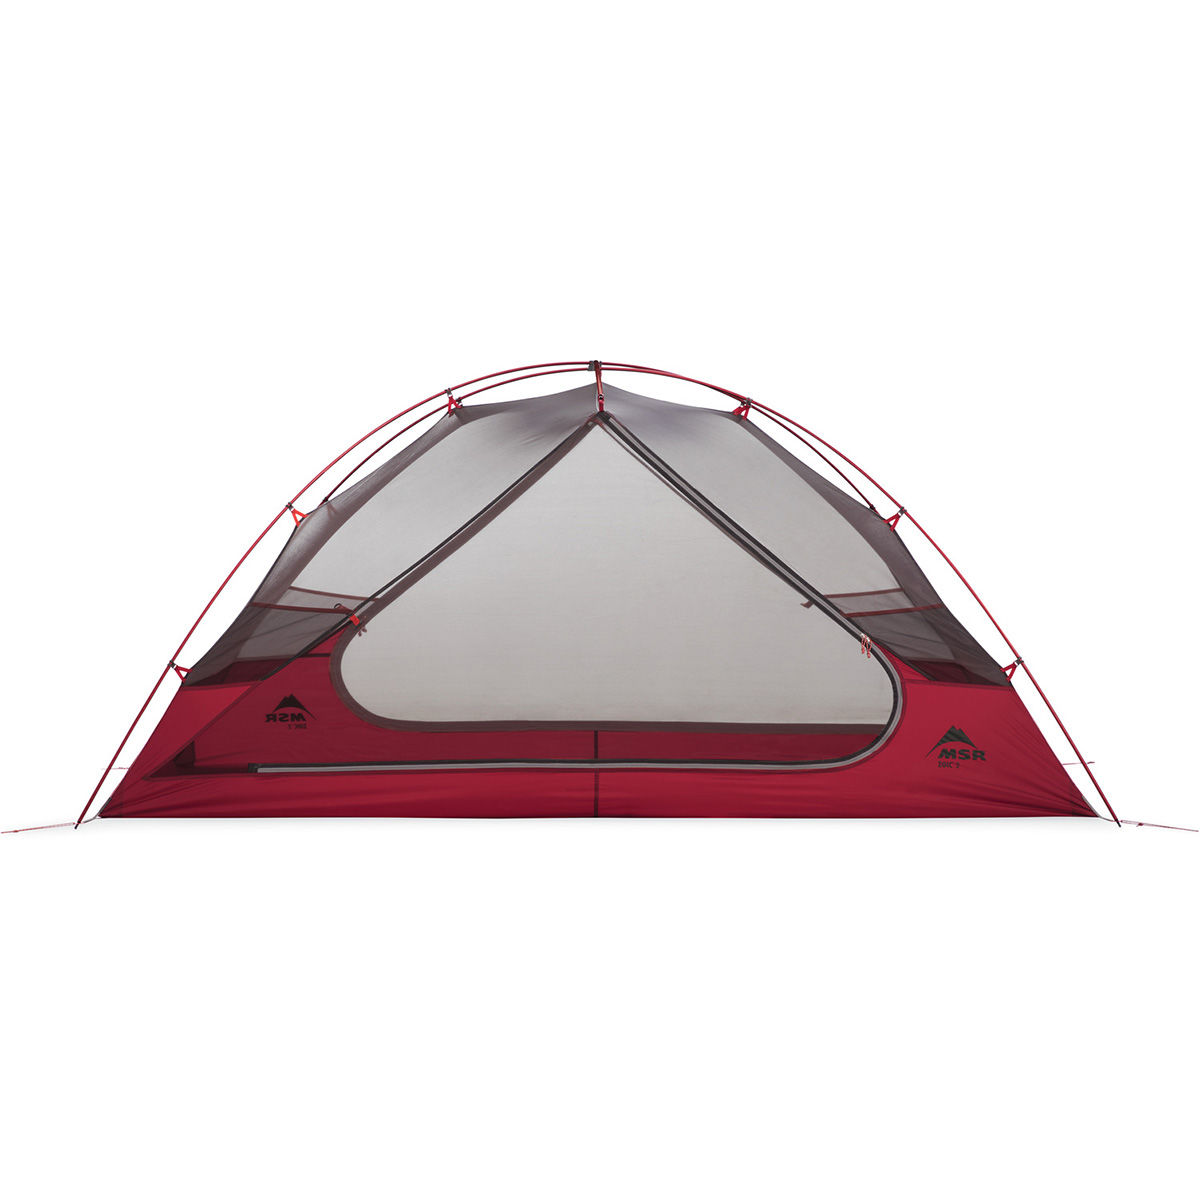 msr-zoic-2-backpacking-tent-2-people